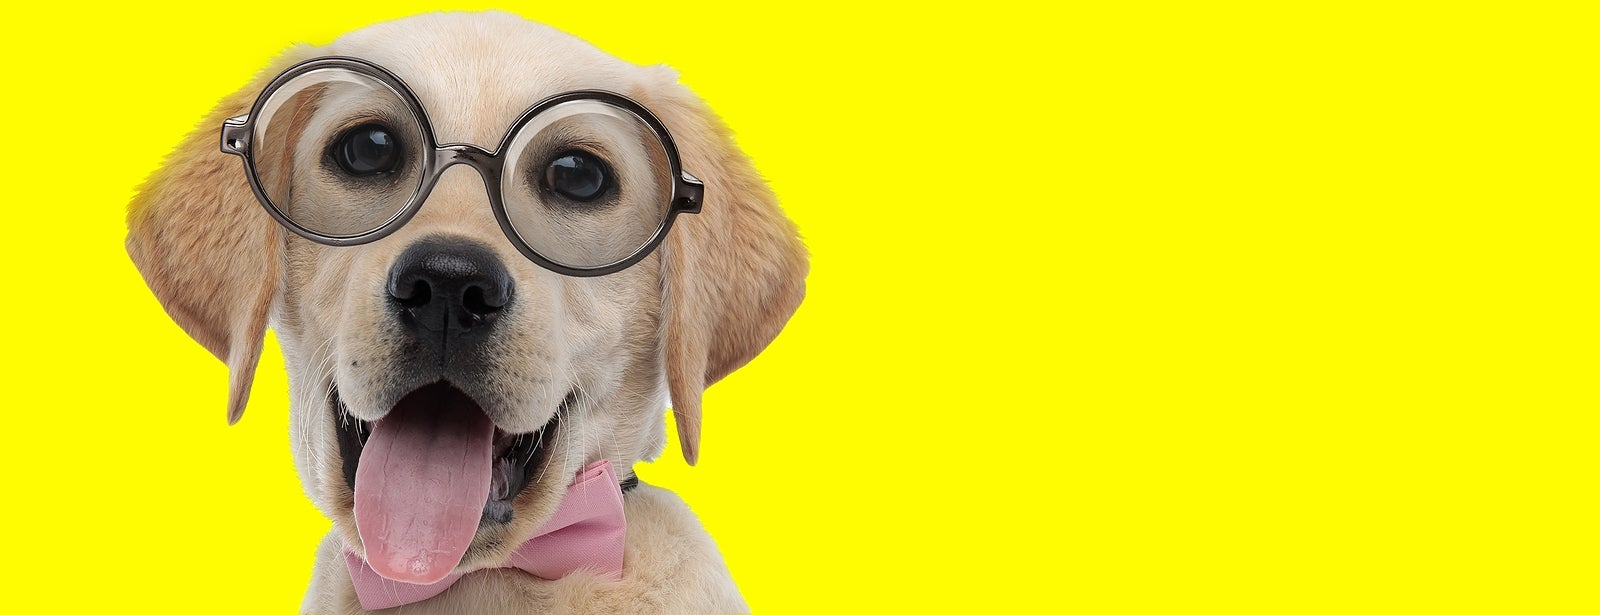 cute labrador retriever dog  with big eyes wearing glasses and sticking out tongue on yellow background